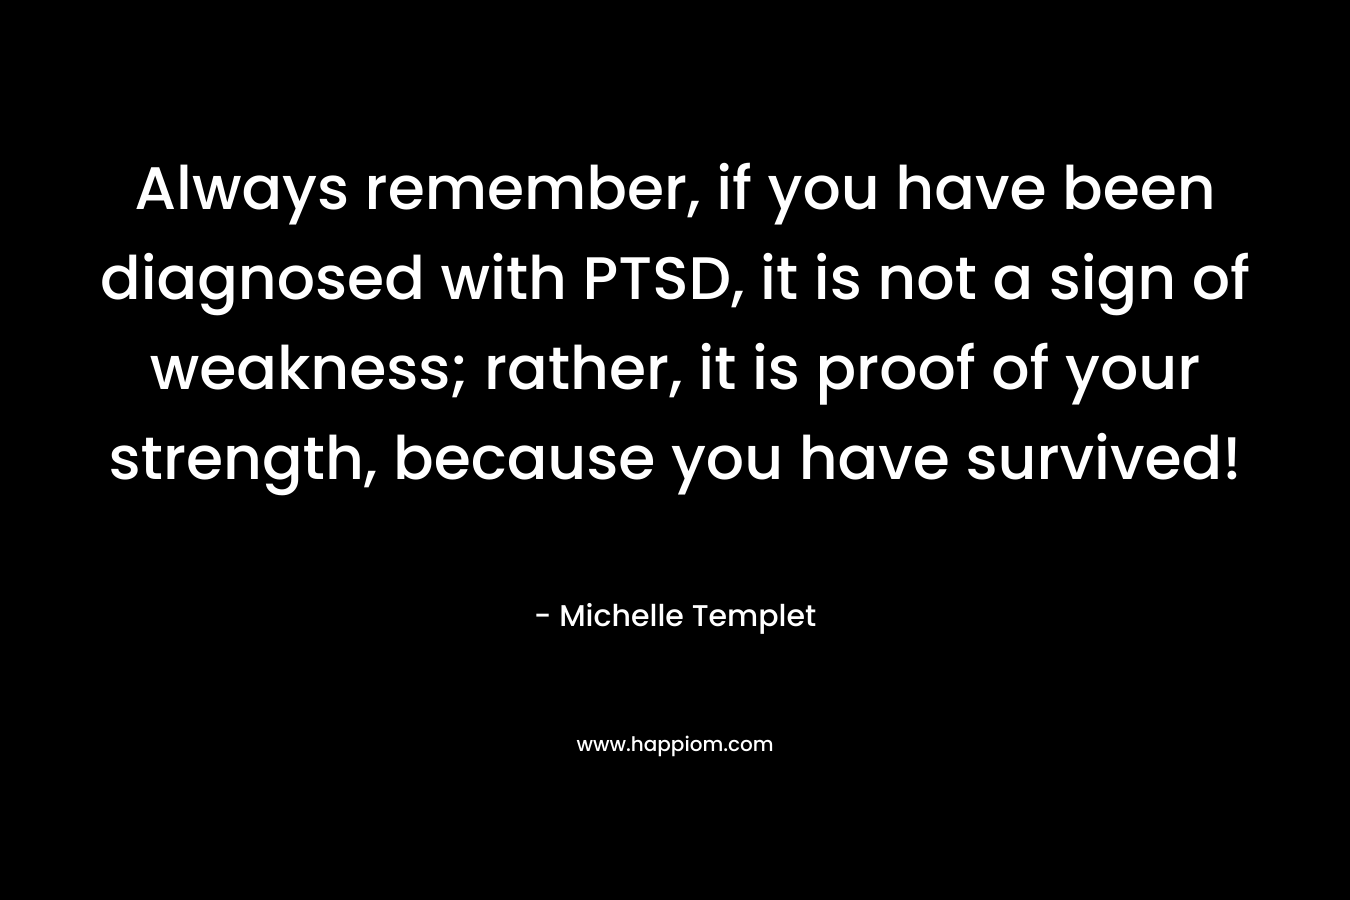 Always remember, if you have been diagnosed with PTSD, it is not a sign of weakness; rather, it is proof of your strength, because you have survived!